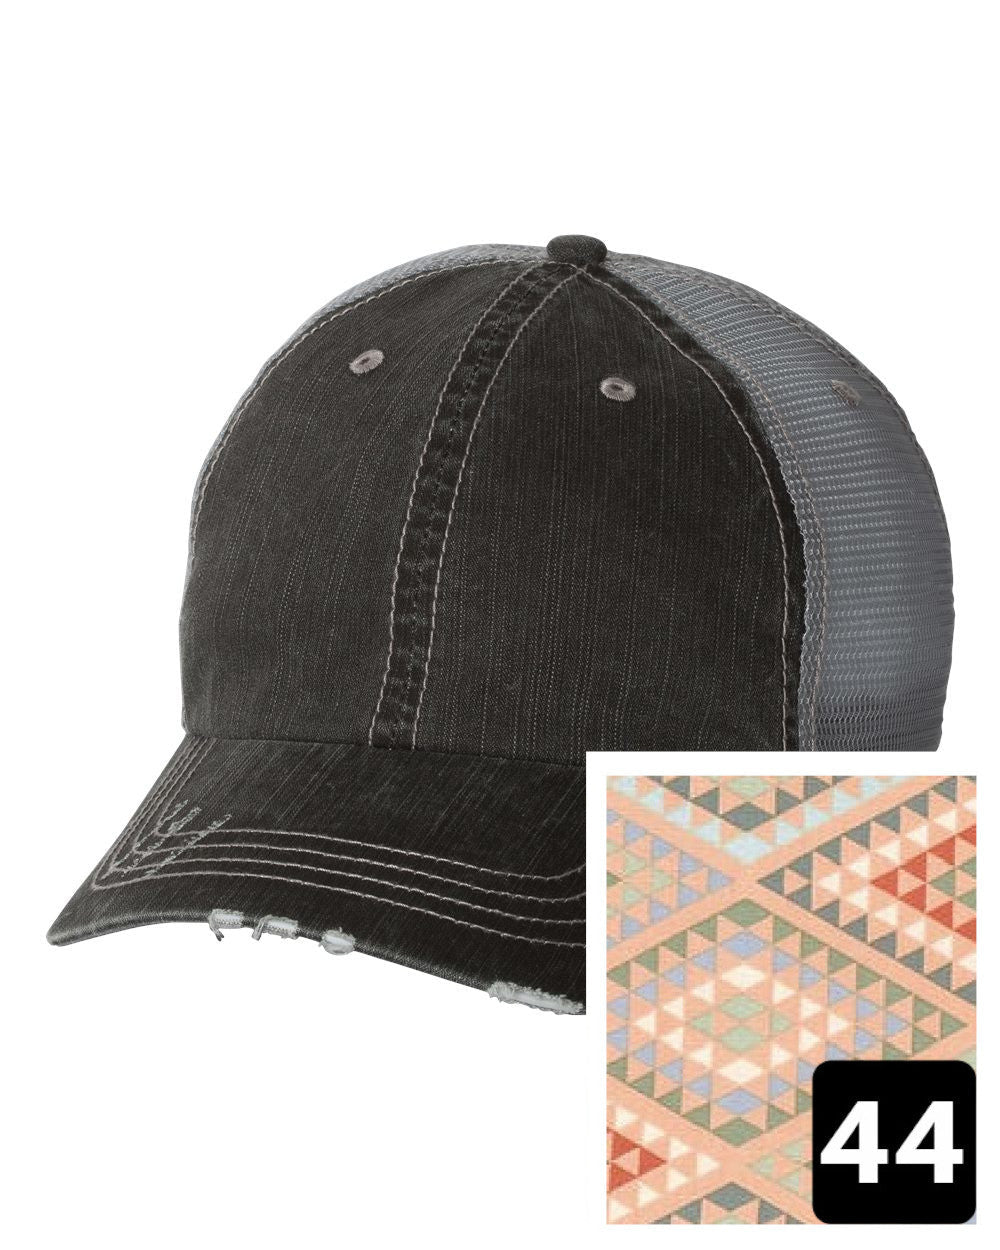 gray distressed trucker hat with navy coral and white chevron fabric state of Connecticut